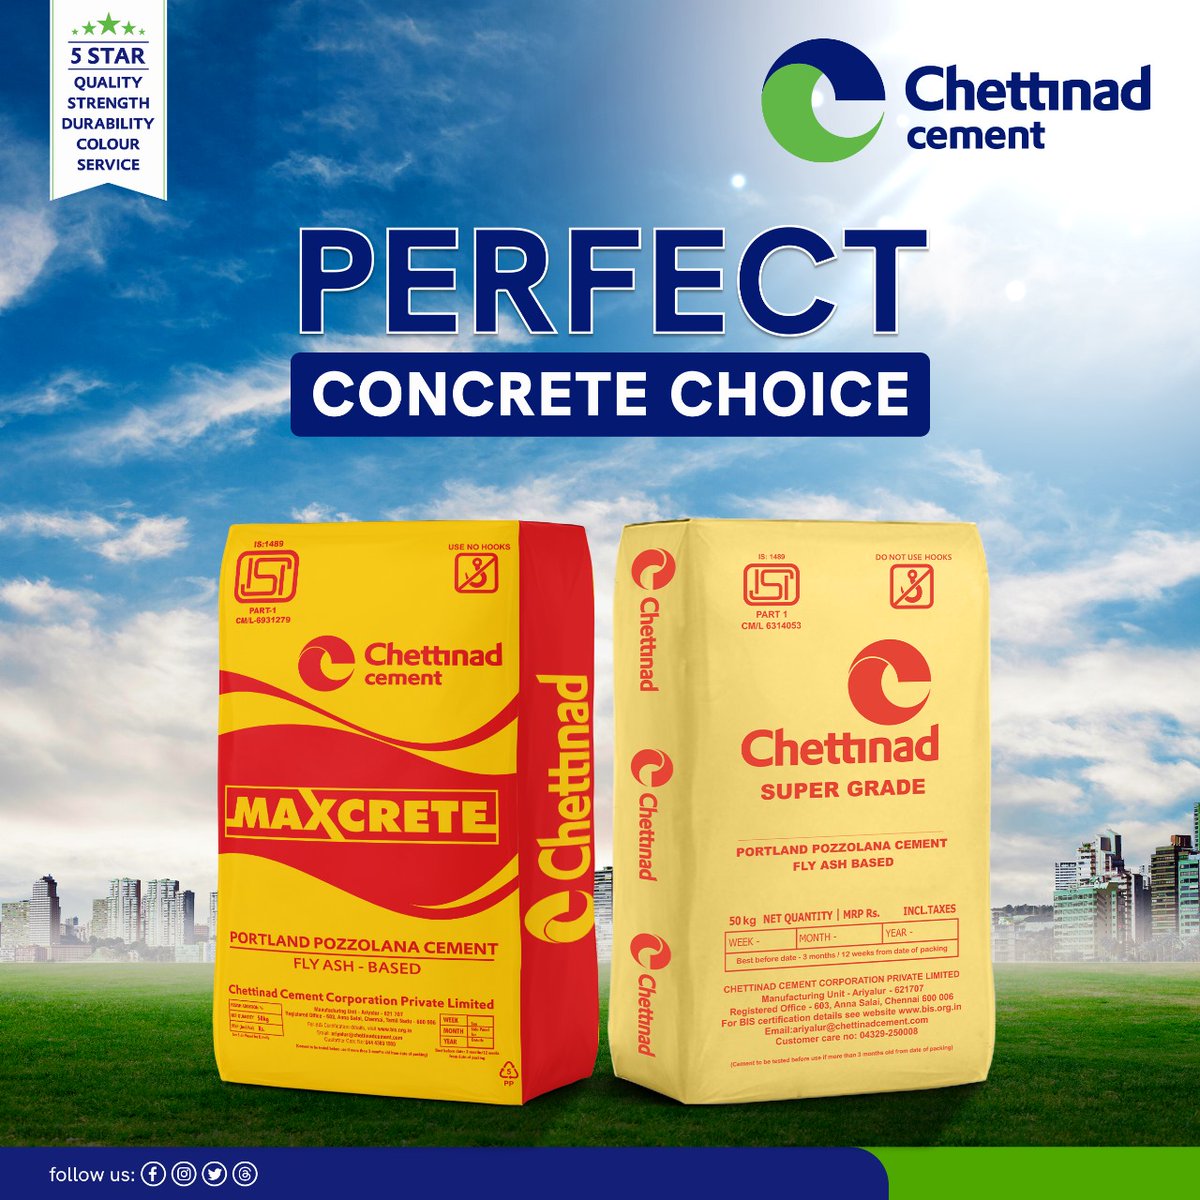 Chettinad Cement Maxcrete is a strong and durable concrete mix, ideal for robust construction projects. Super Grade Cement by Chettinad Cement ensures top-notch quality for reliable and sturdy building applications.
#chettinadcements #maxcretecement #perfectchoice #concretechoice